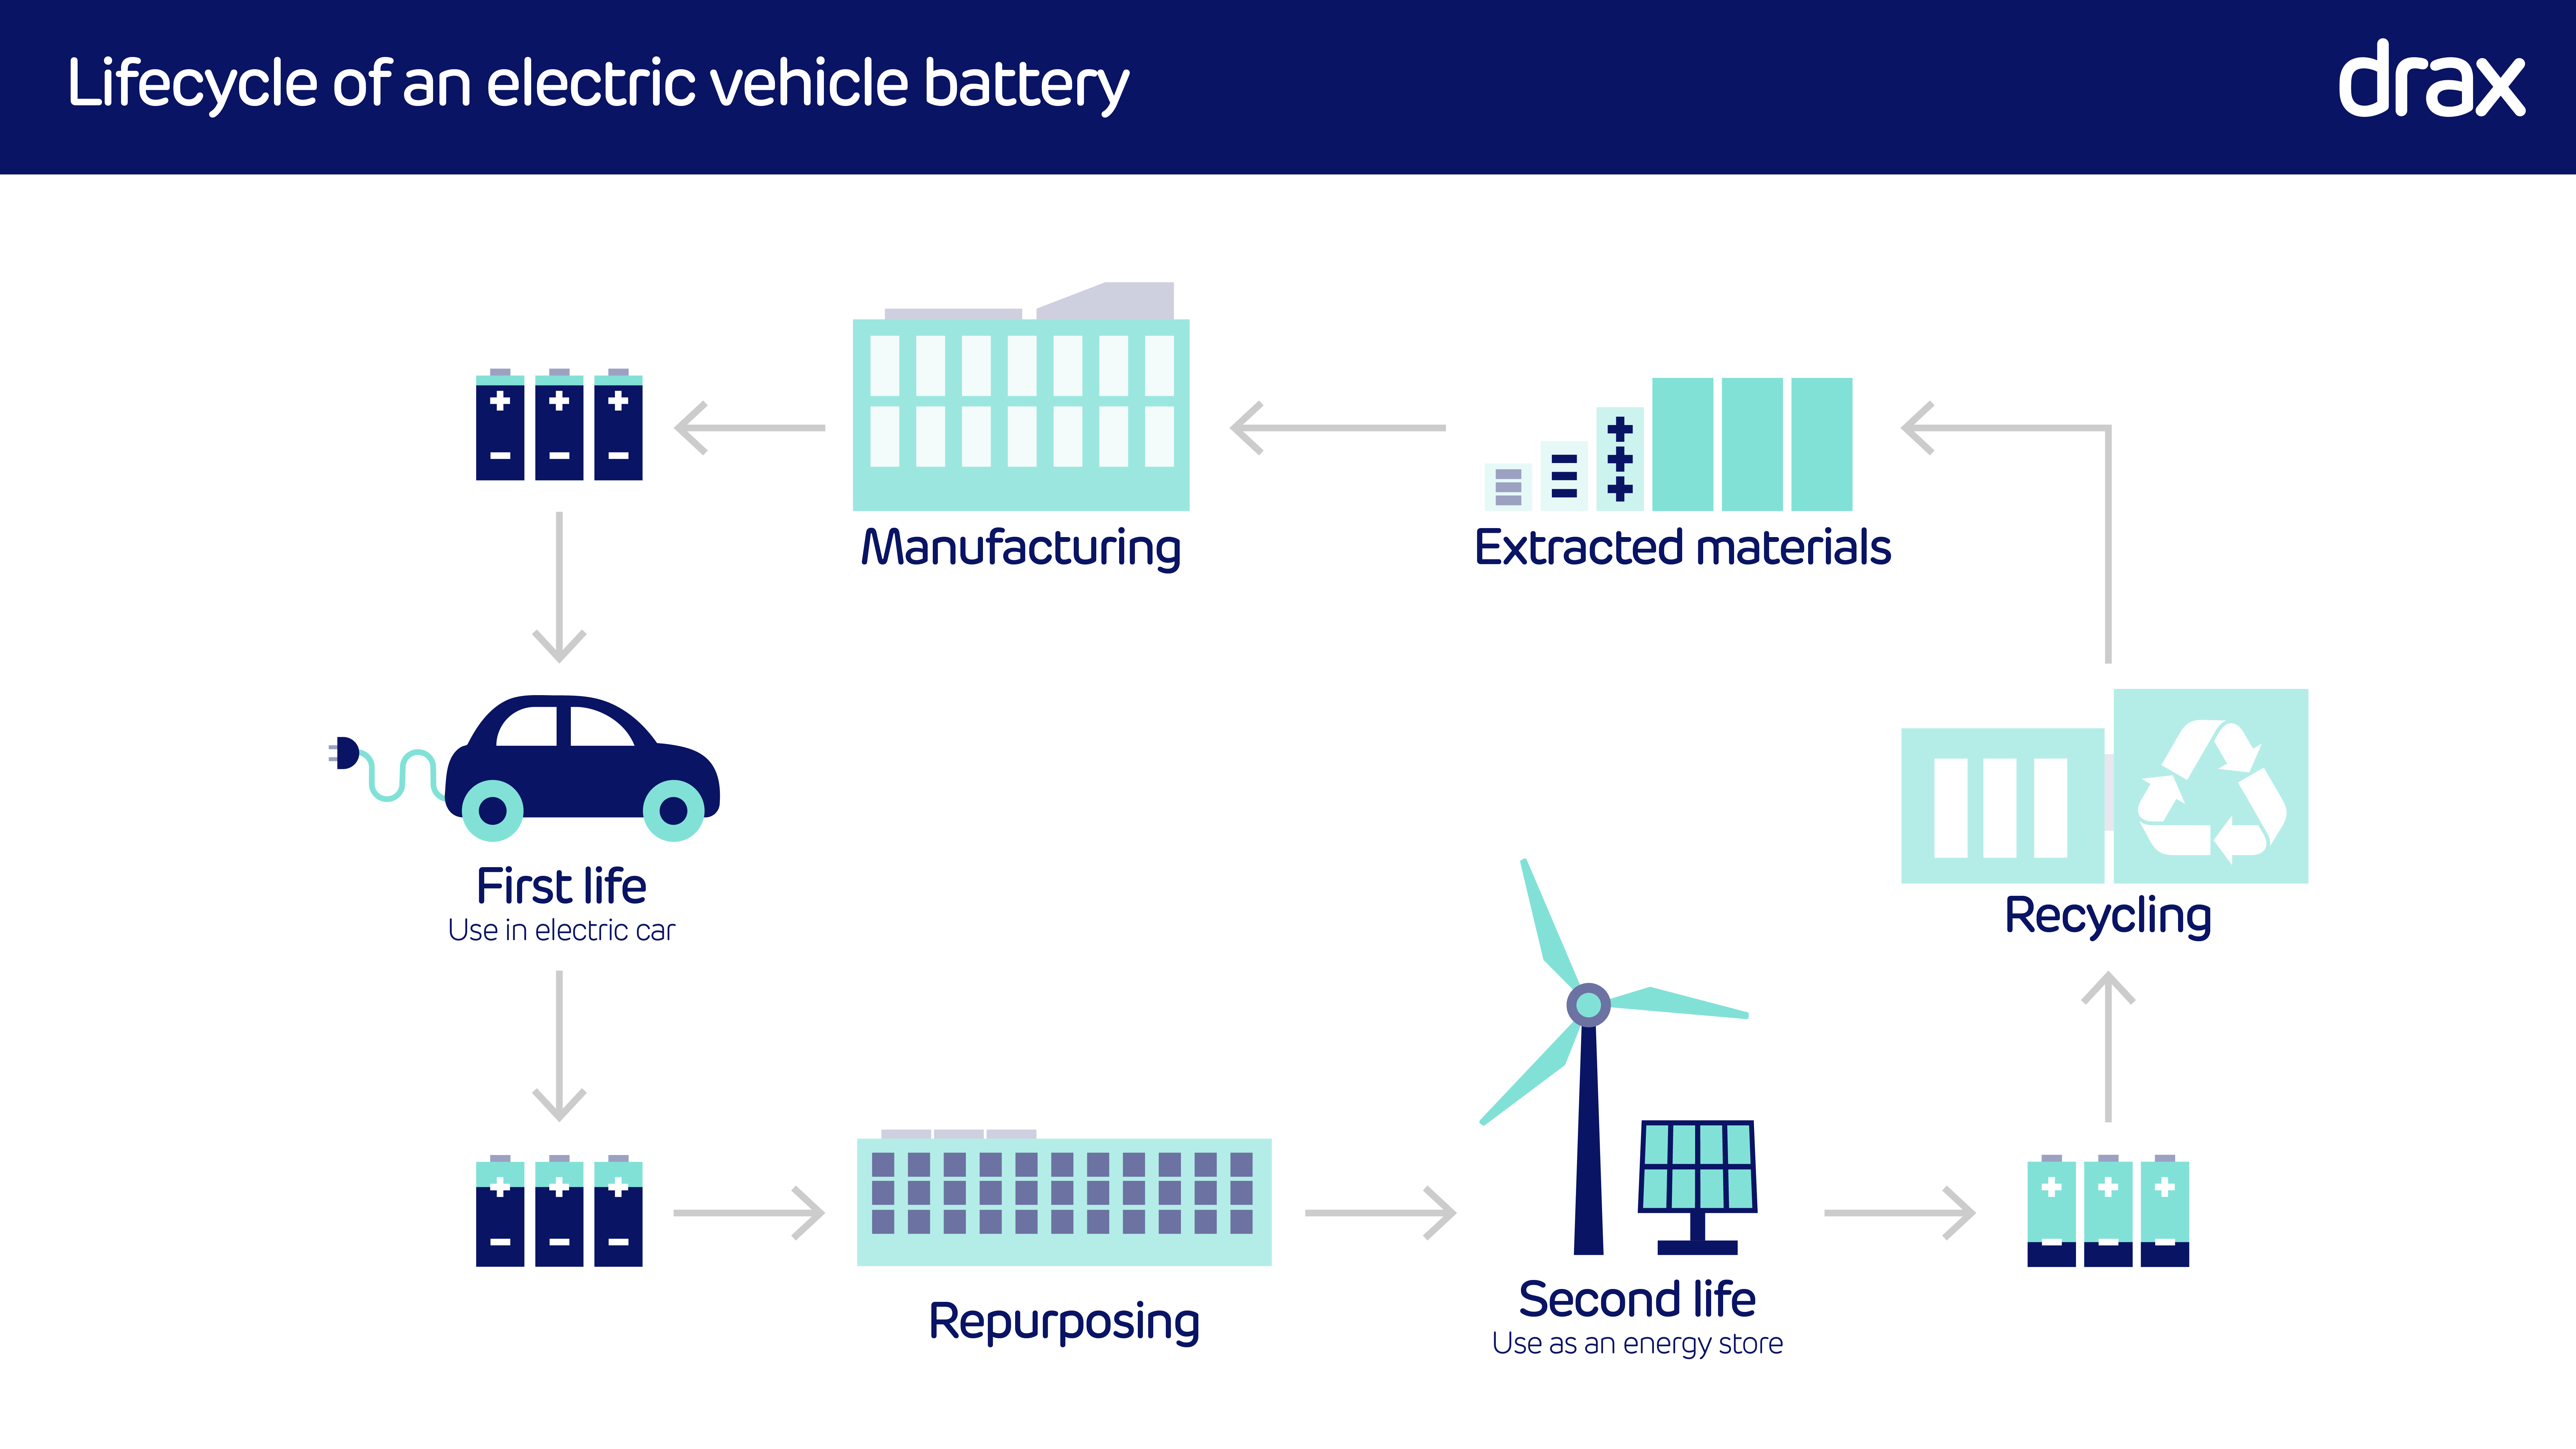 The lifecycle of a battery